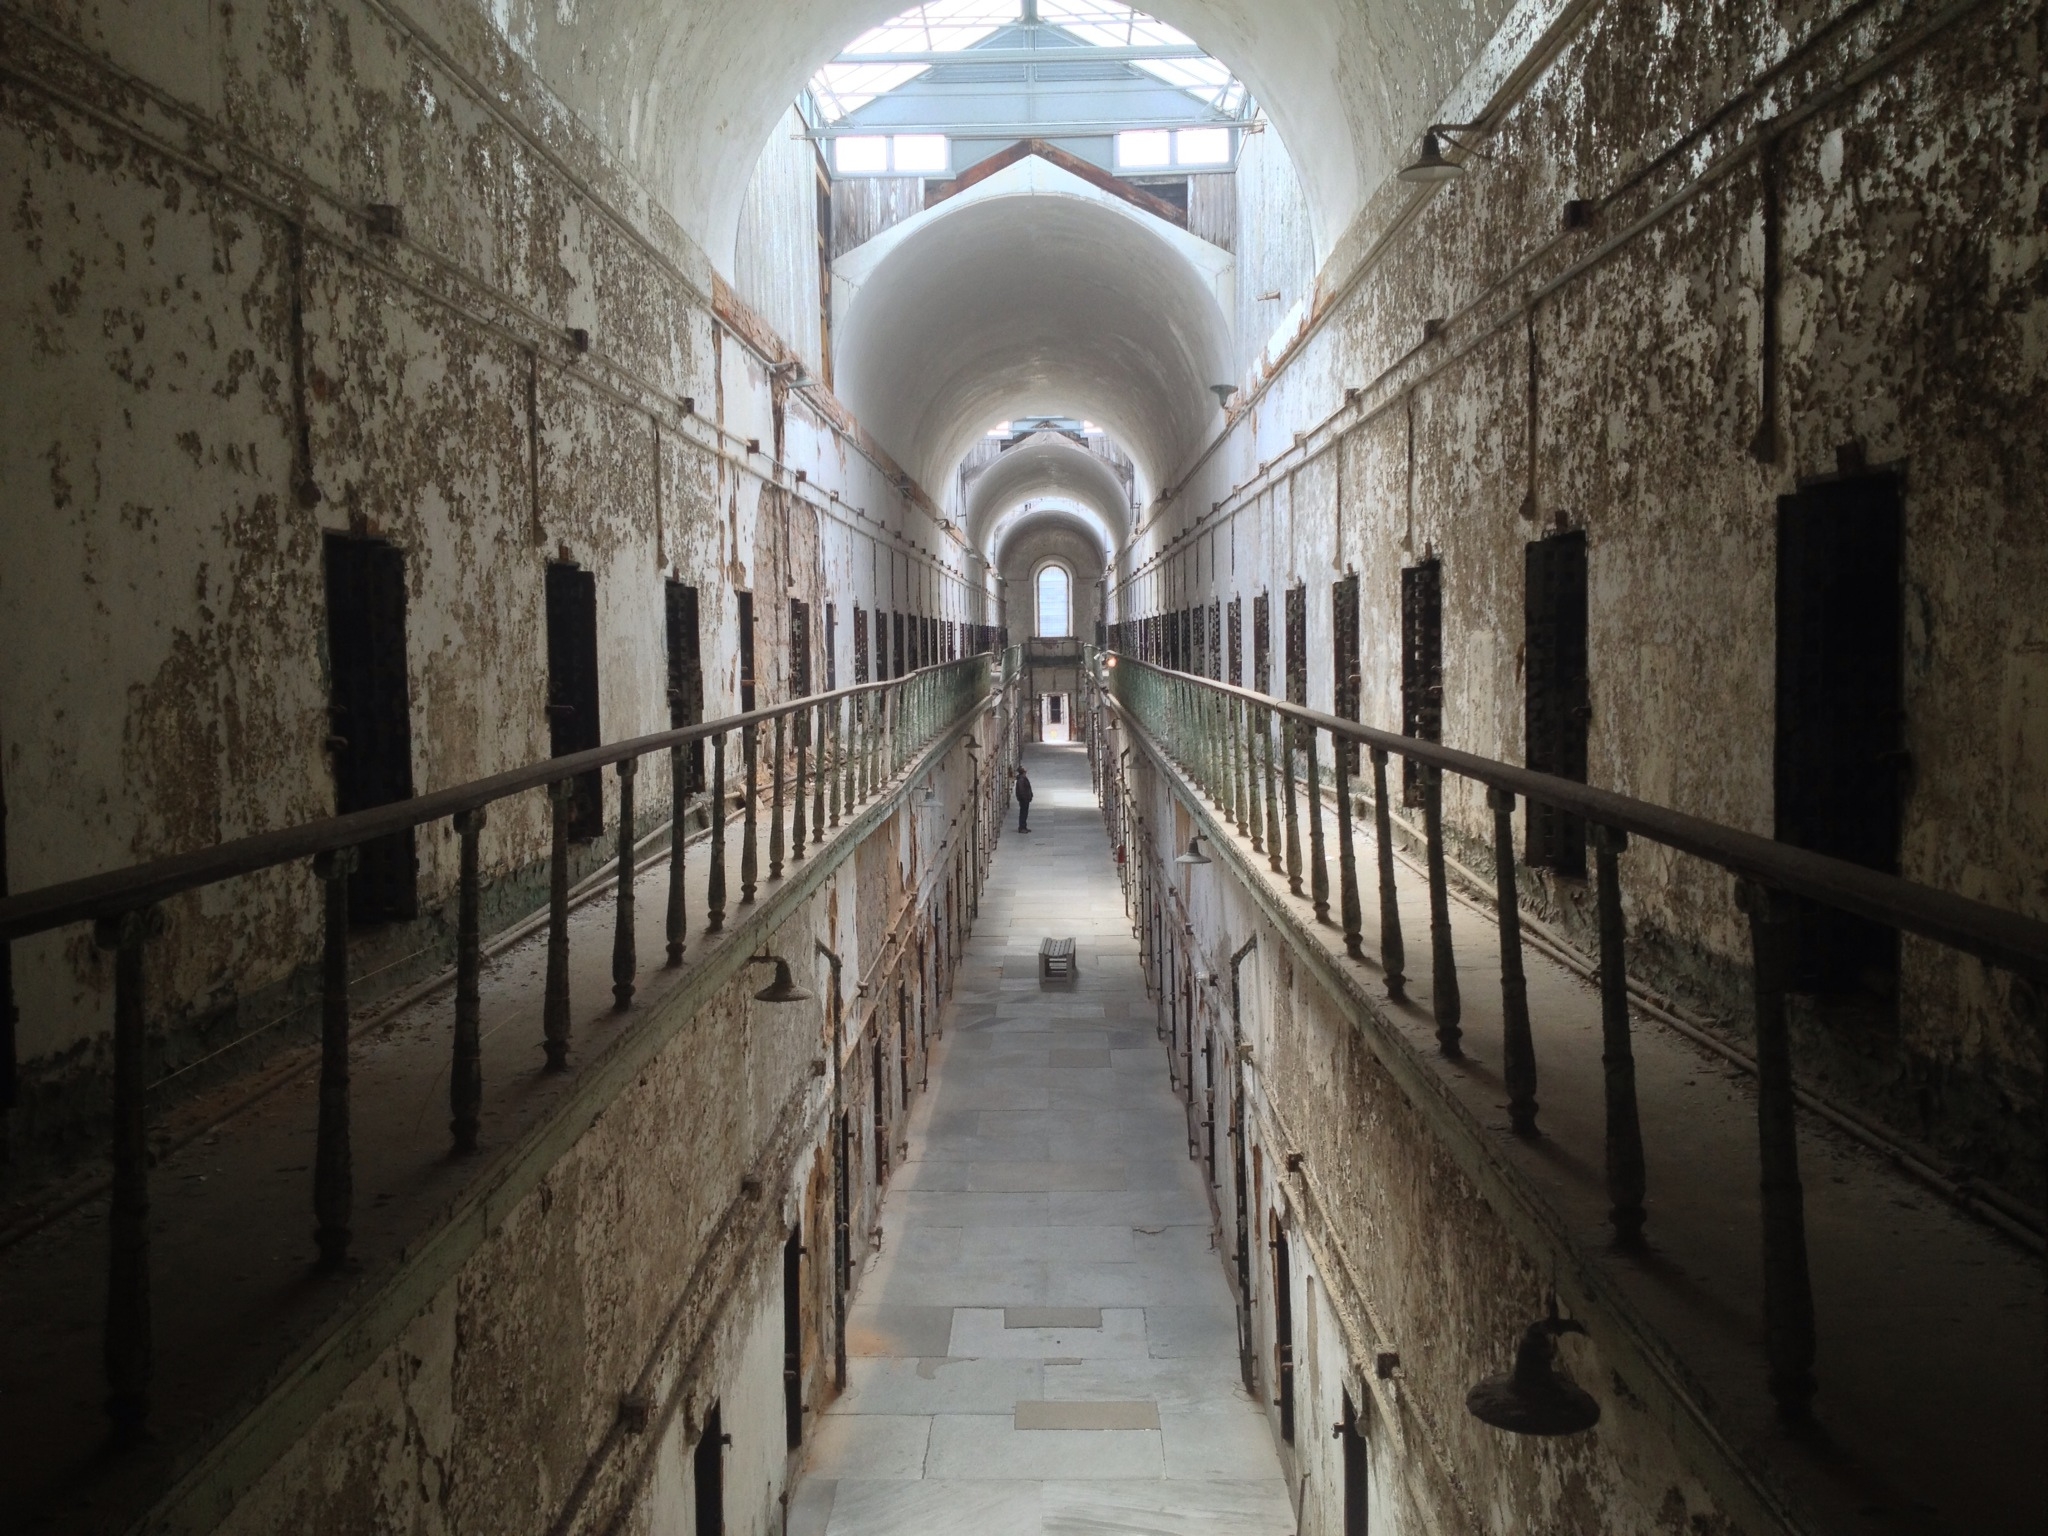 Photograph of a long hall of cells with light and a dome at the end